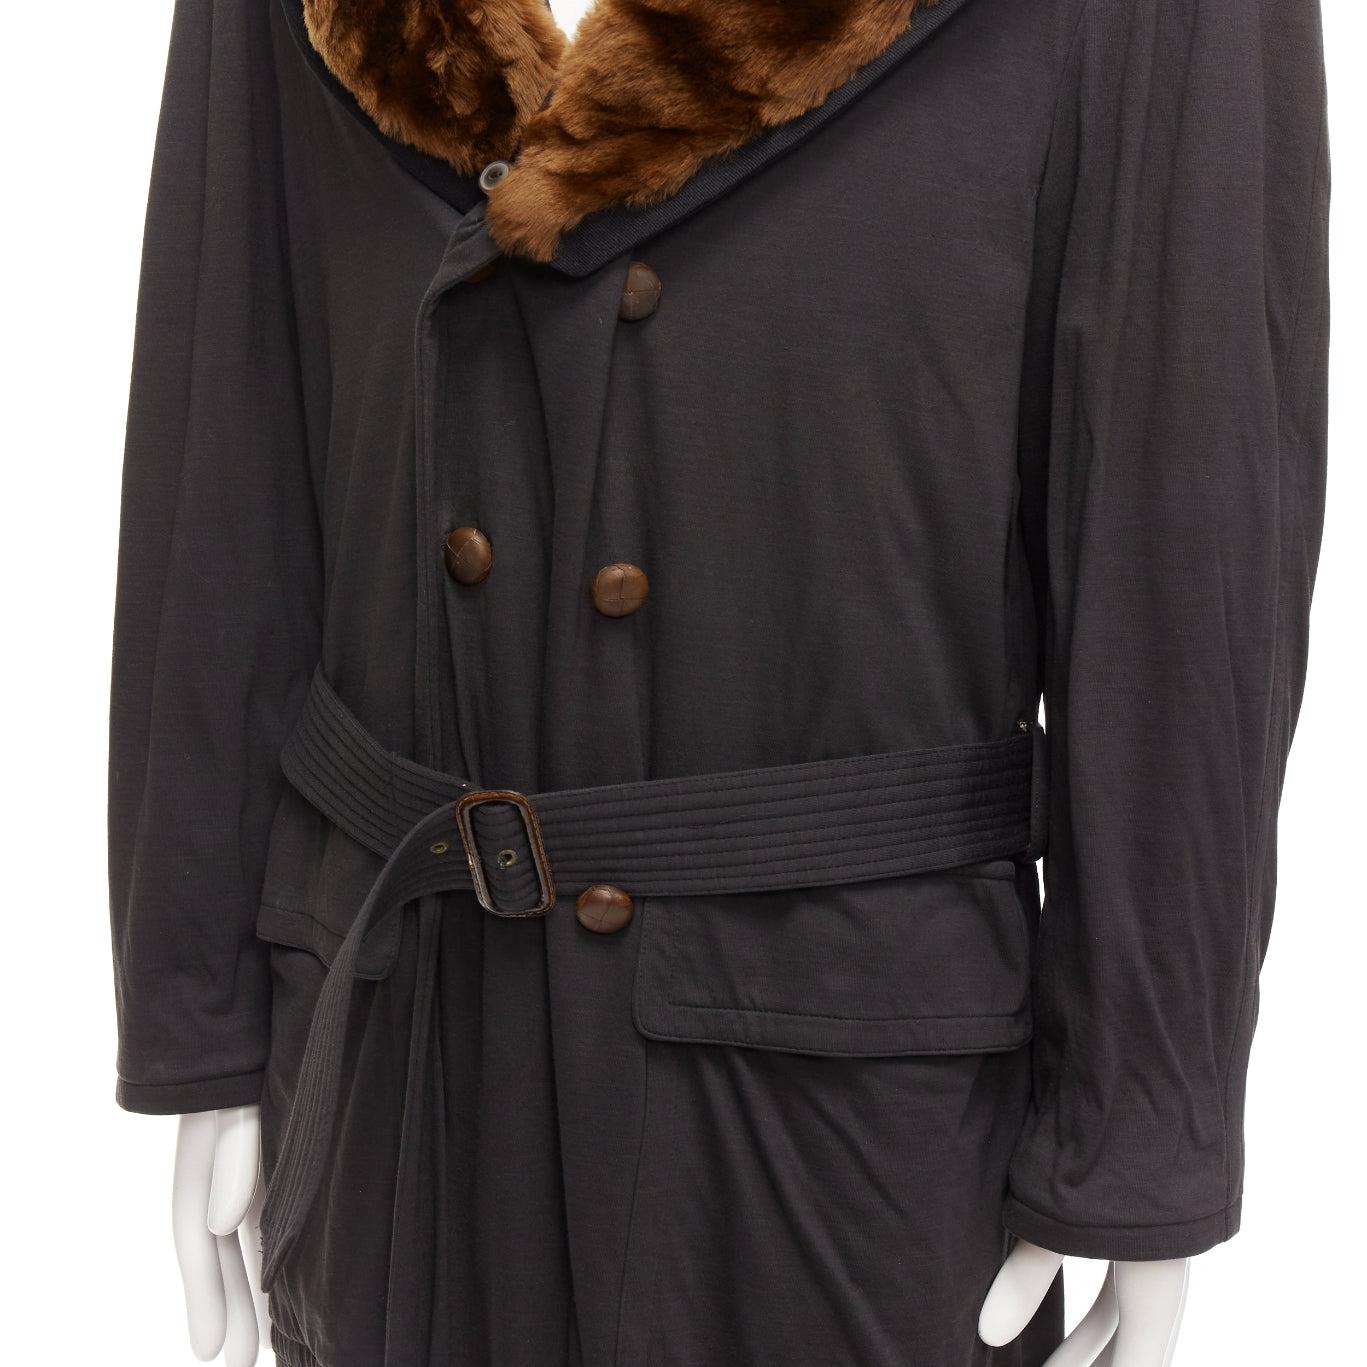 rare JEAN PAUL GAULTIER HOMME brown faux fur collar black cotton belted coat L
Reference: CNLE/A00304
Brand: Jean Paul Gaultier
Designer: Jean Paul Gaultier
Collection: Homme
Material: Cotton, Faux Fur
Color: Brown, Black
Pattern: Solid
Closure: